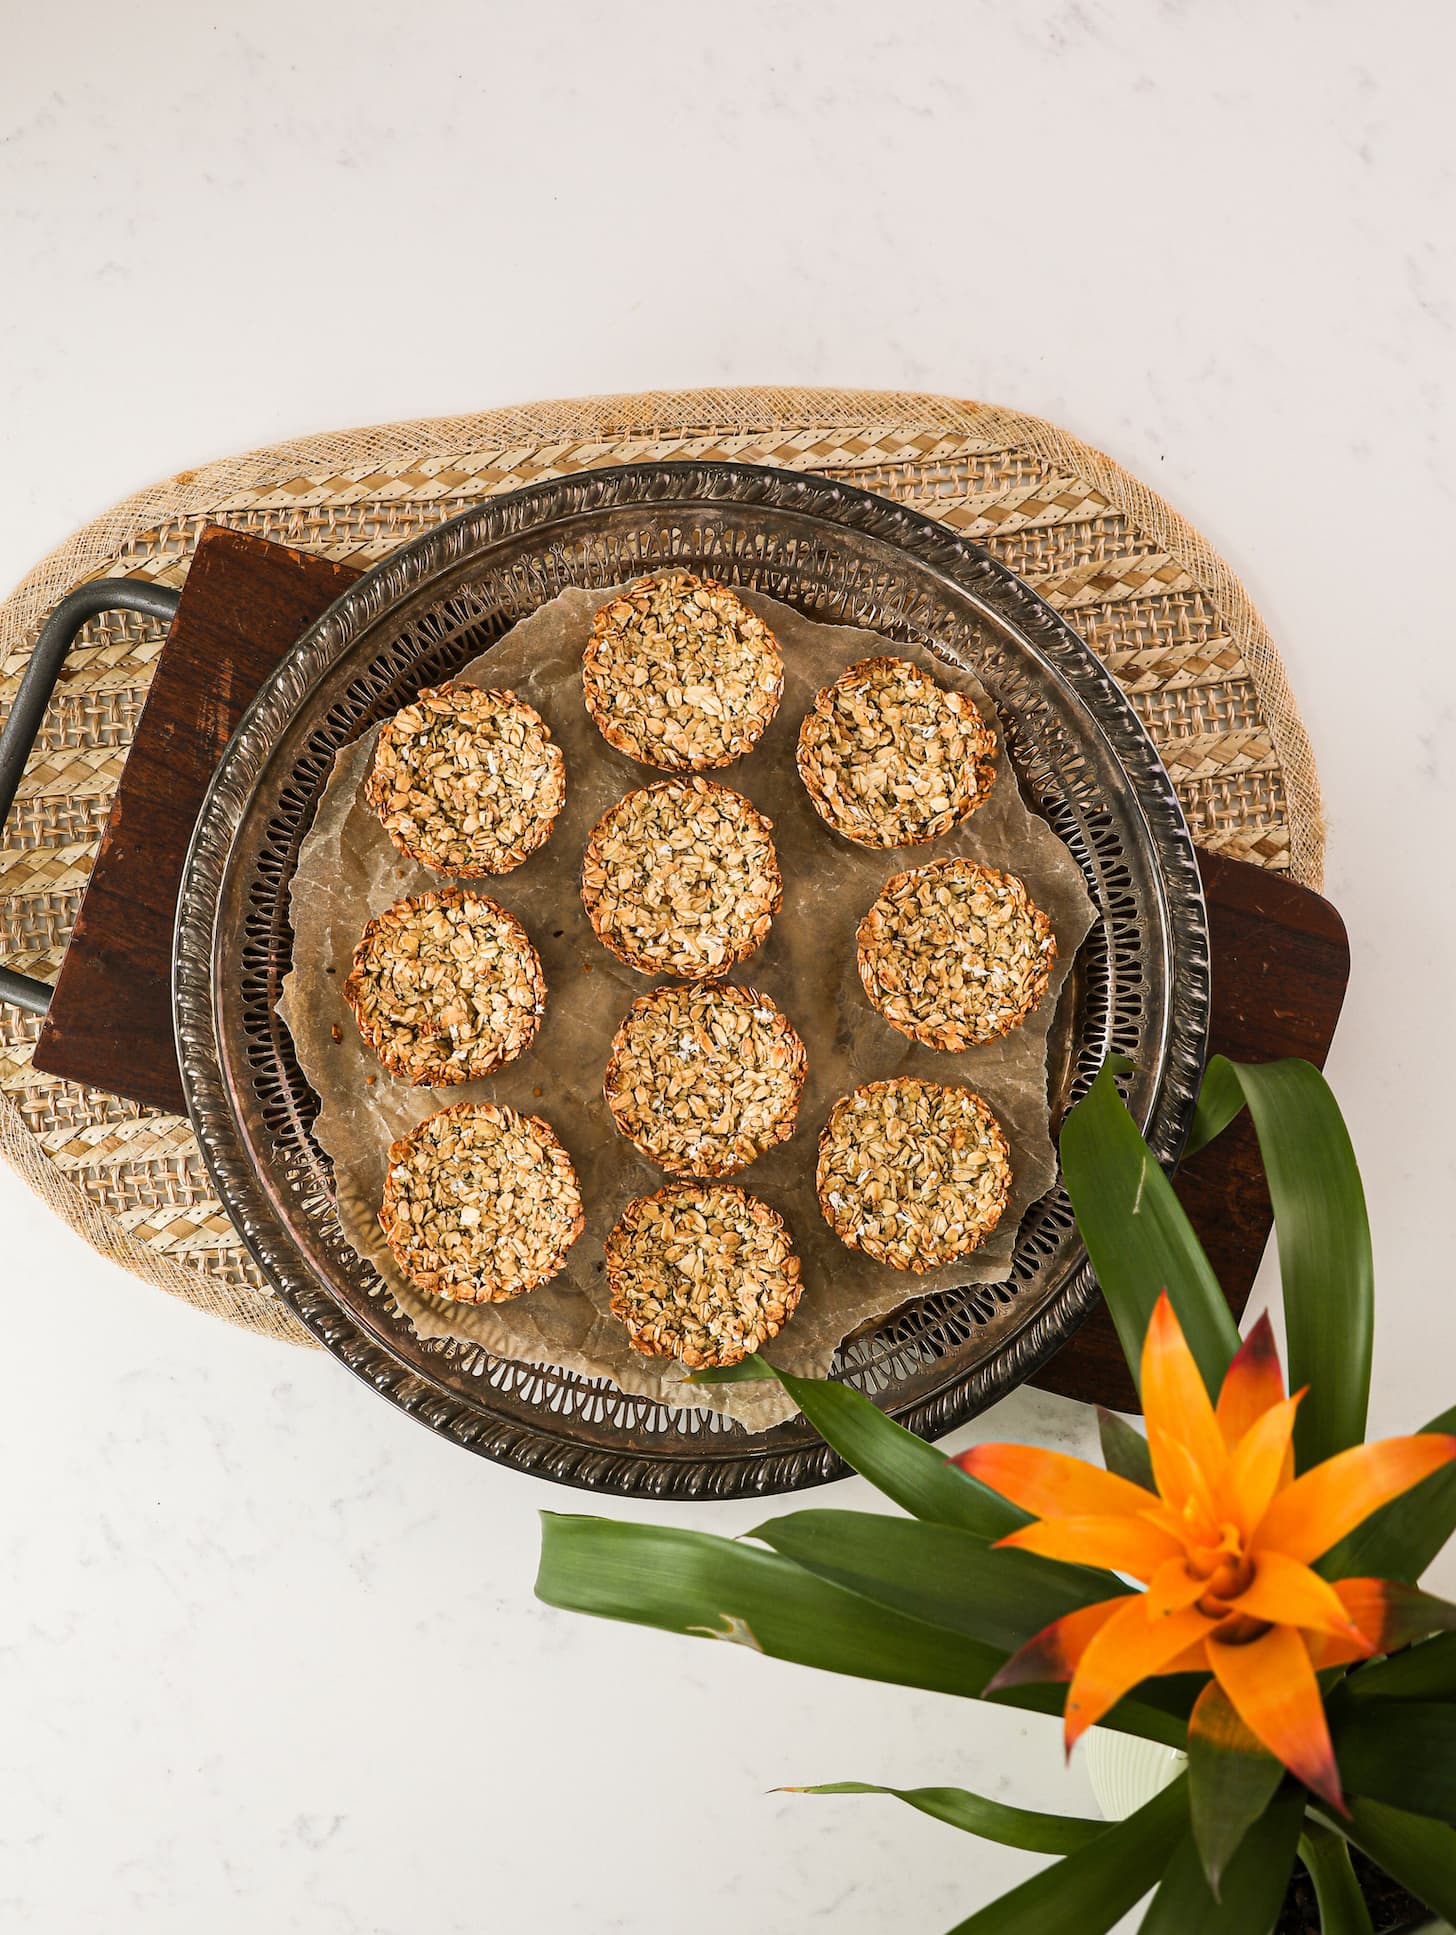 A round tray holding baked oat cups. There is a plant in one corner.